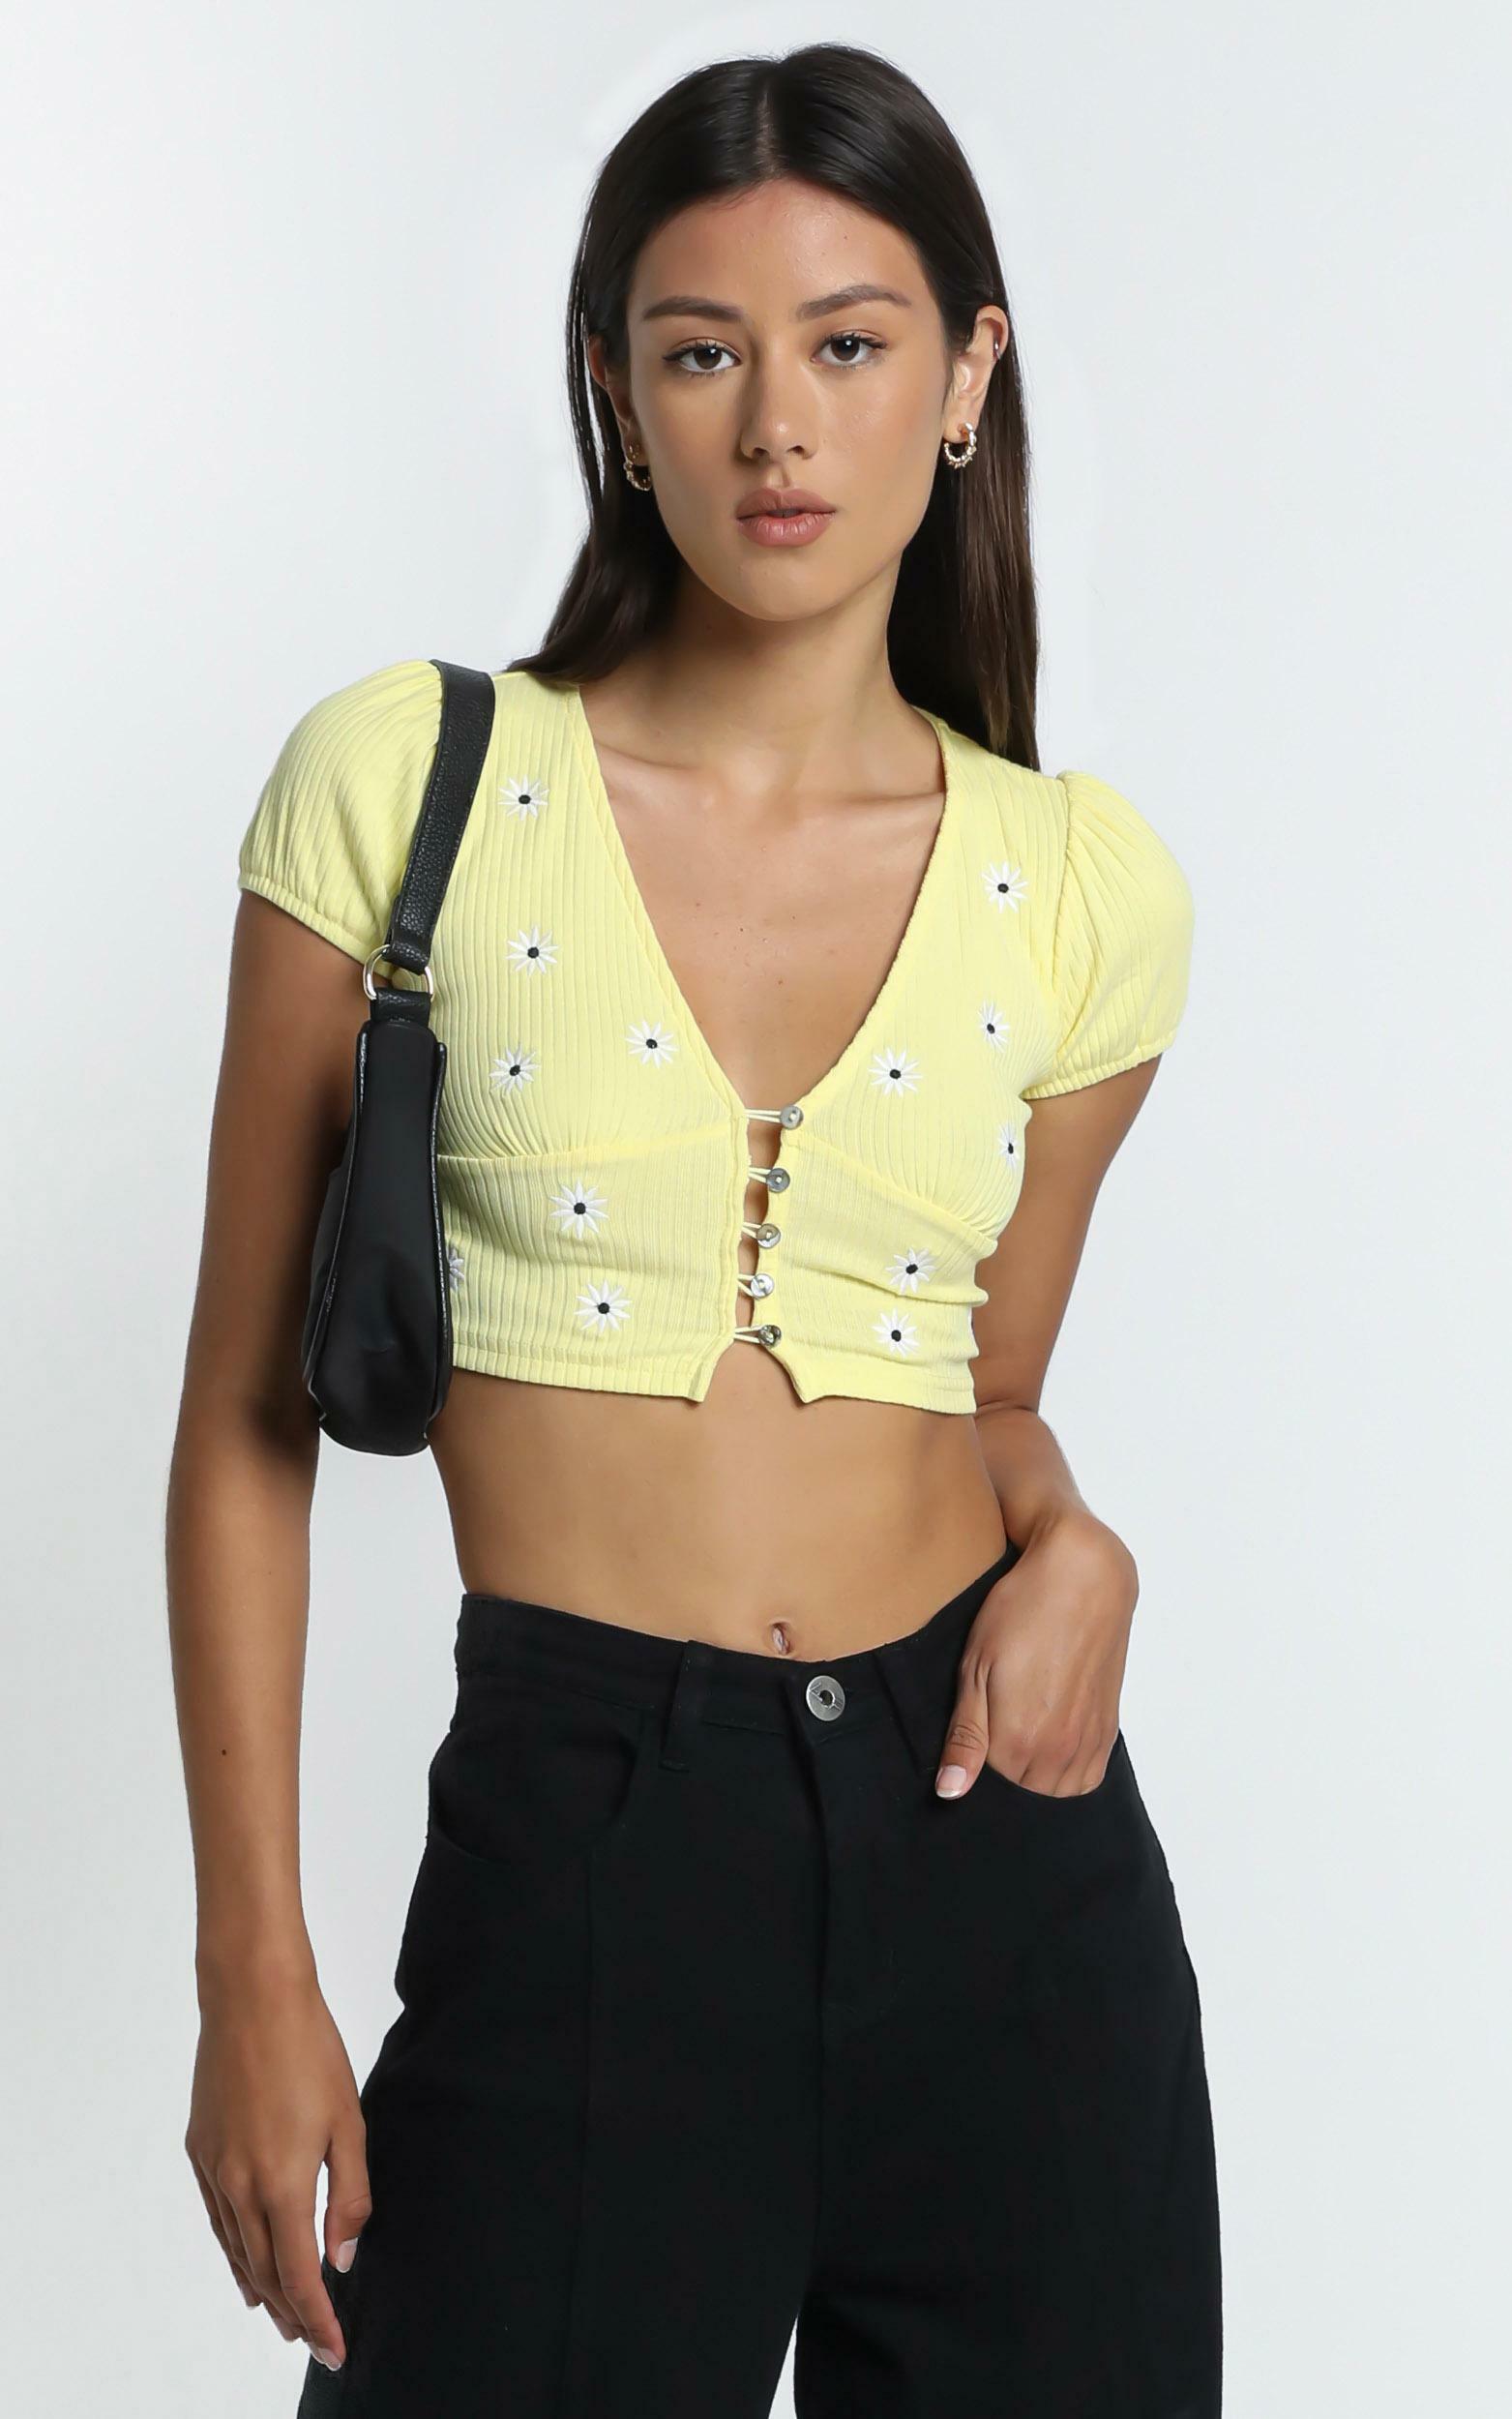 Cadence Top in Yellow - 8 (S), Yellow, hi-res image number null